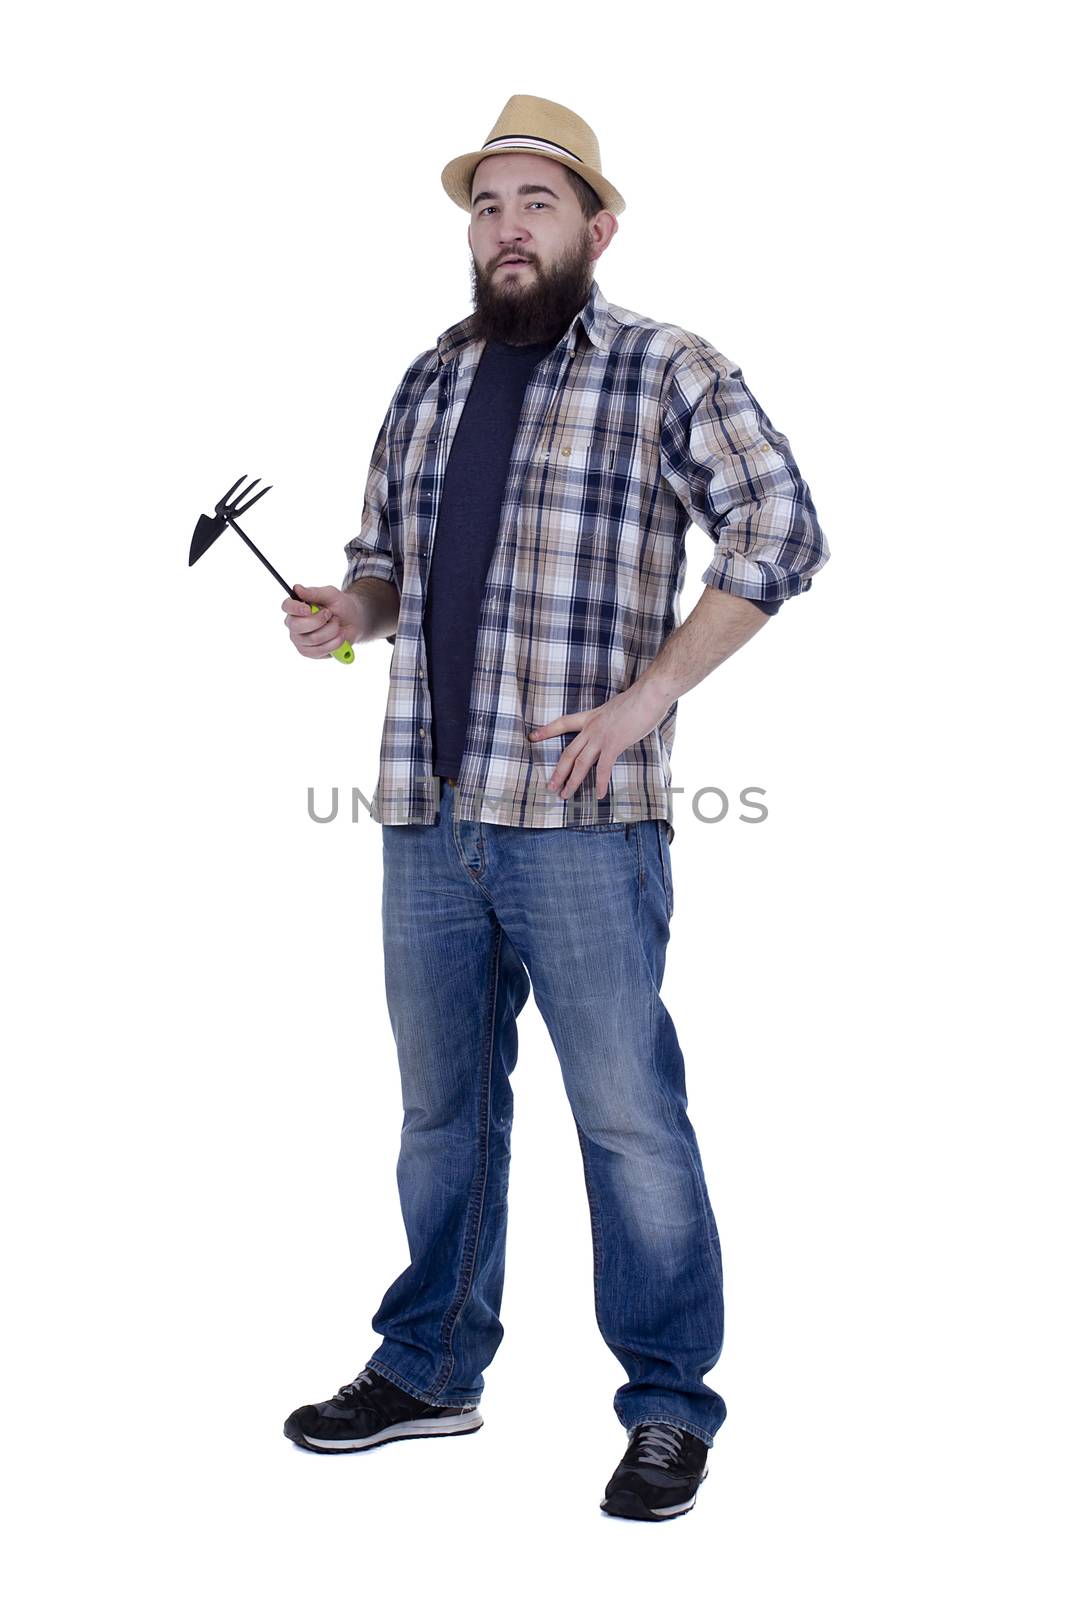 Bearded man with a garden stock on a white background